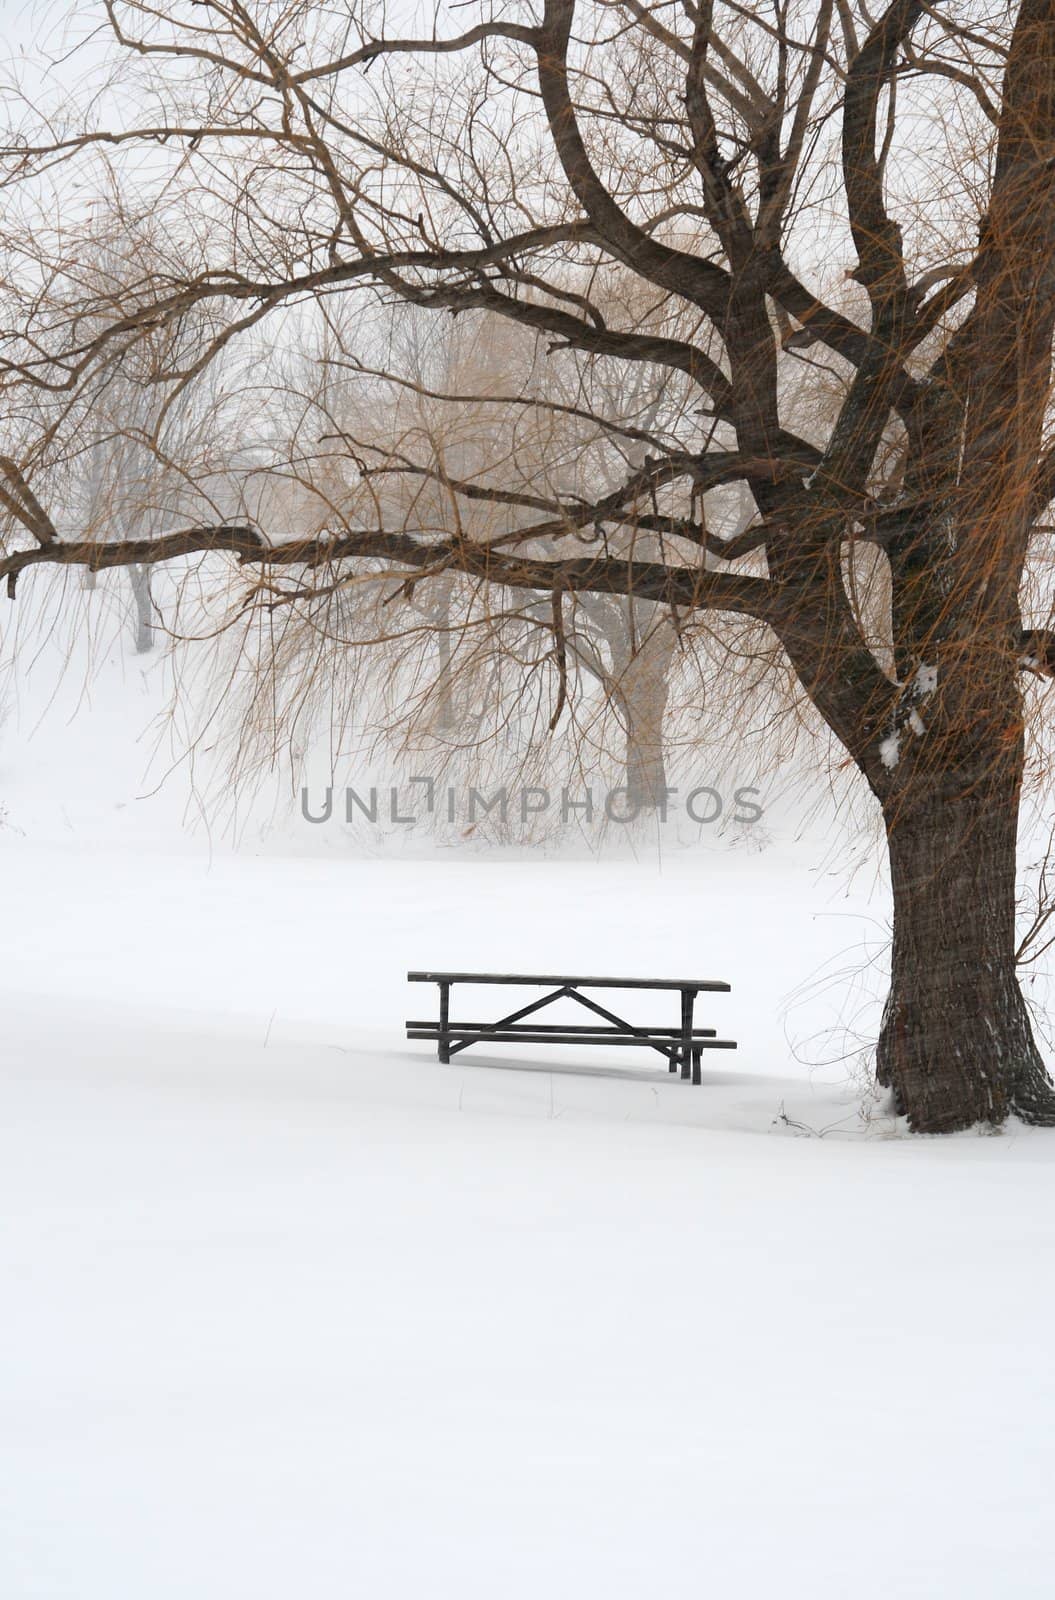 Picnic table in snow under a tree during winter snowstorm.